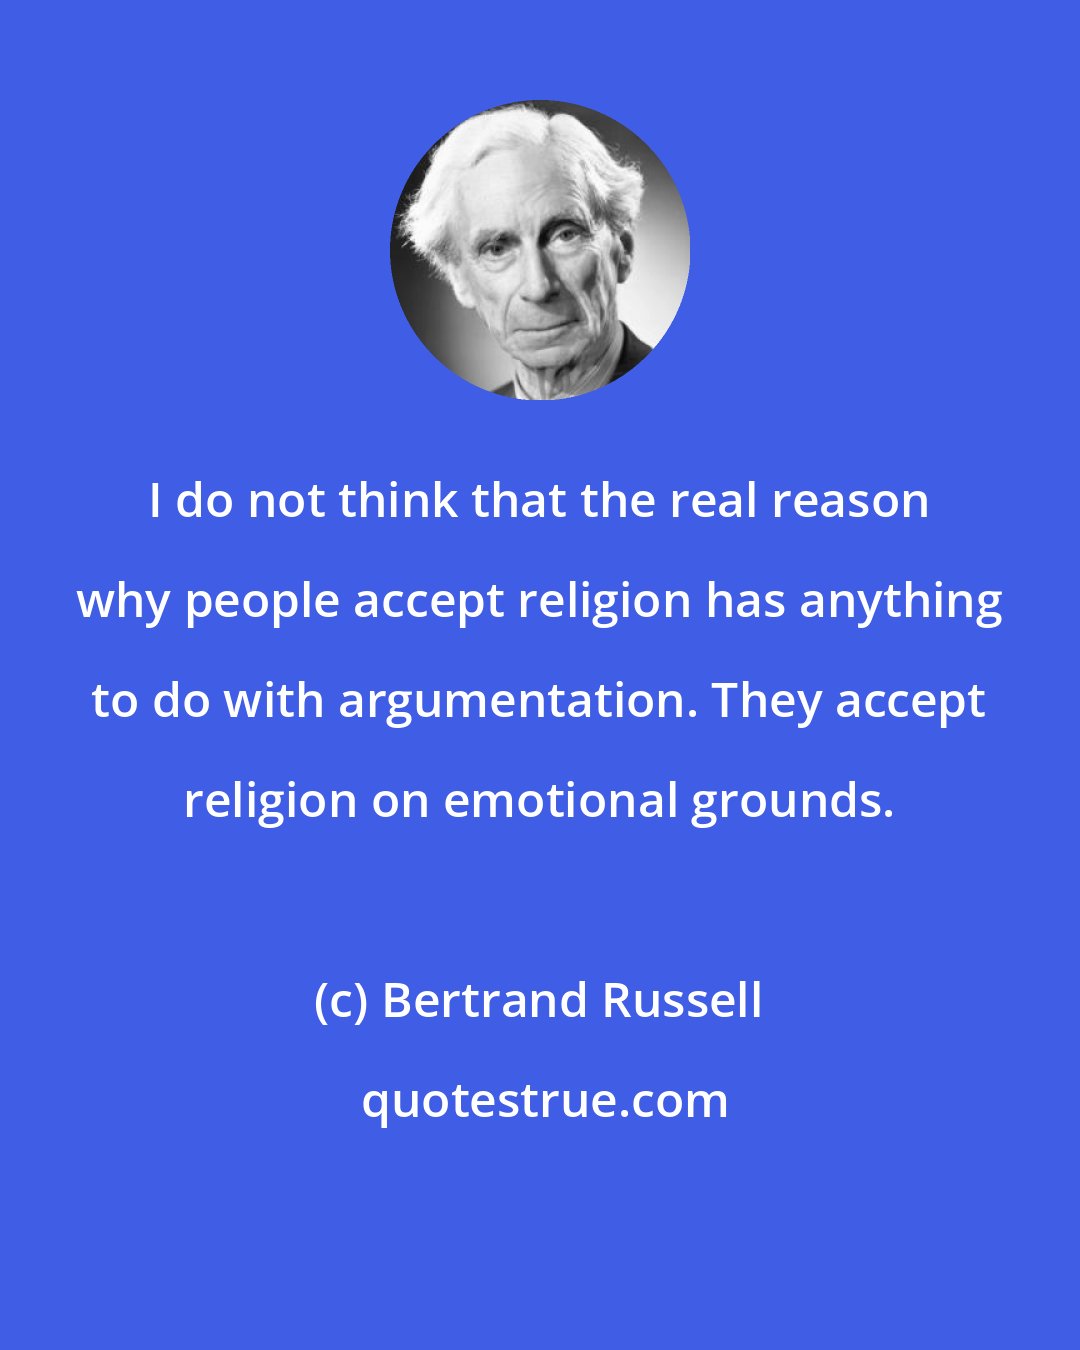 Bertrand Russell: I do not think that the real reason why people accept religion has anything to do with argumentation. They accept religion on emotional grounds.